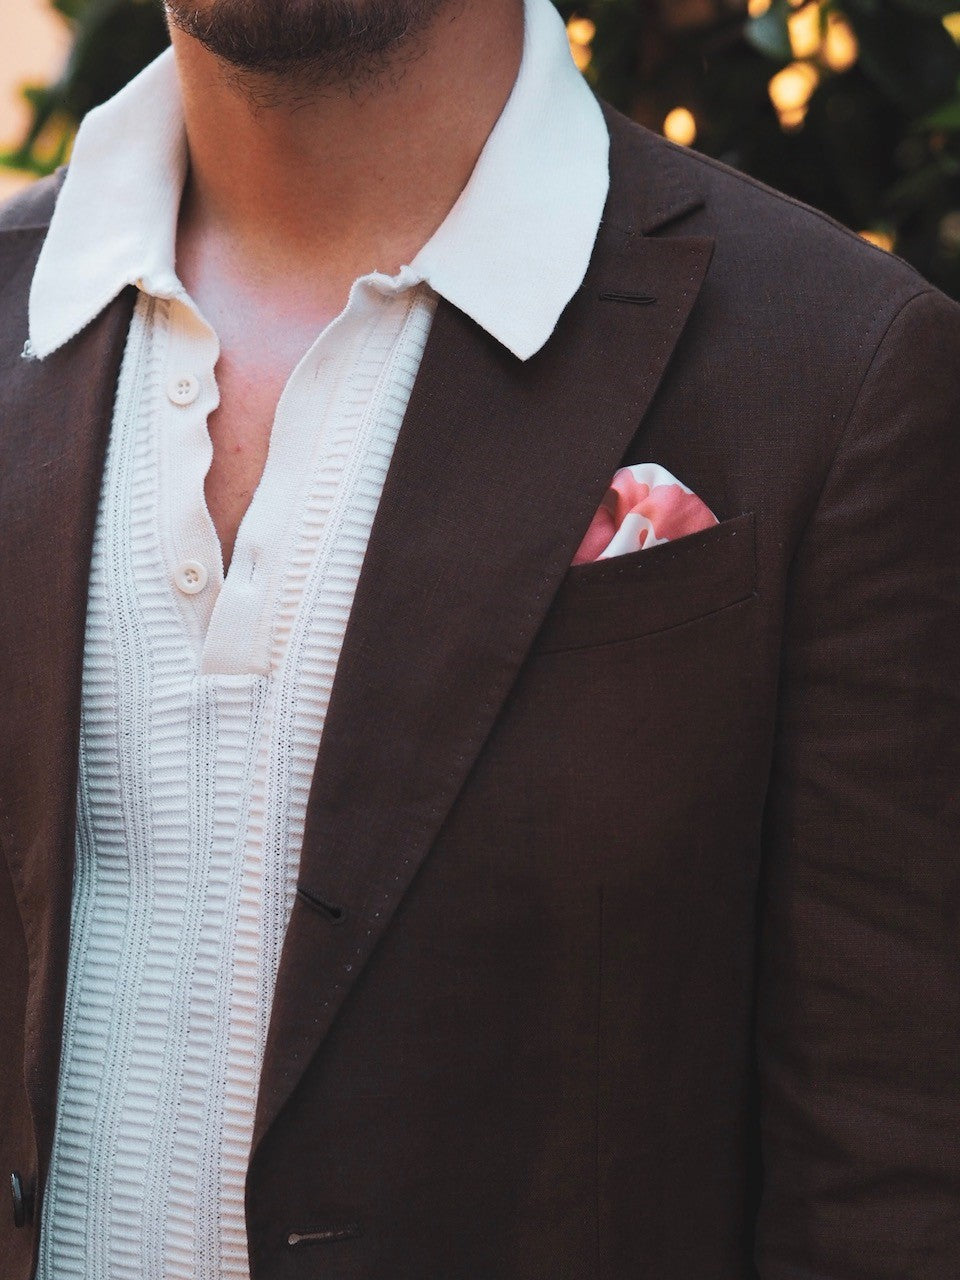 White knitted polo shirt with brown linen suit jacket details and textures